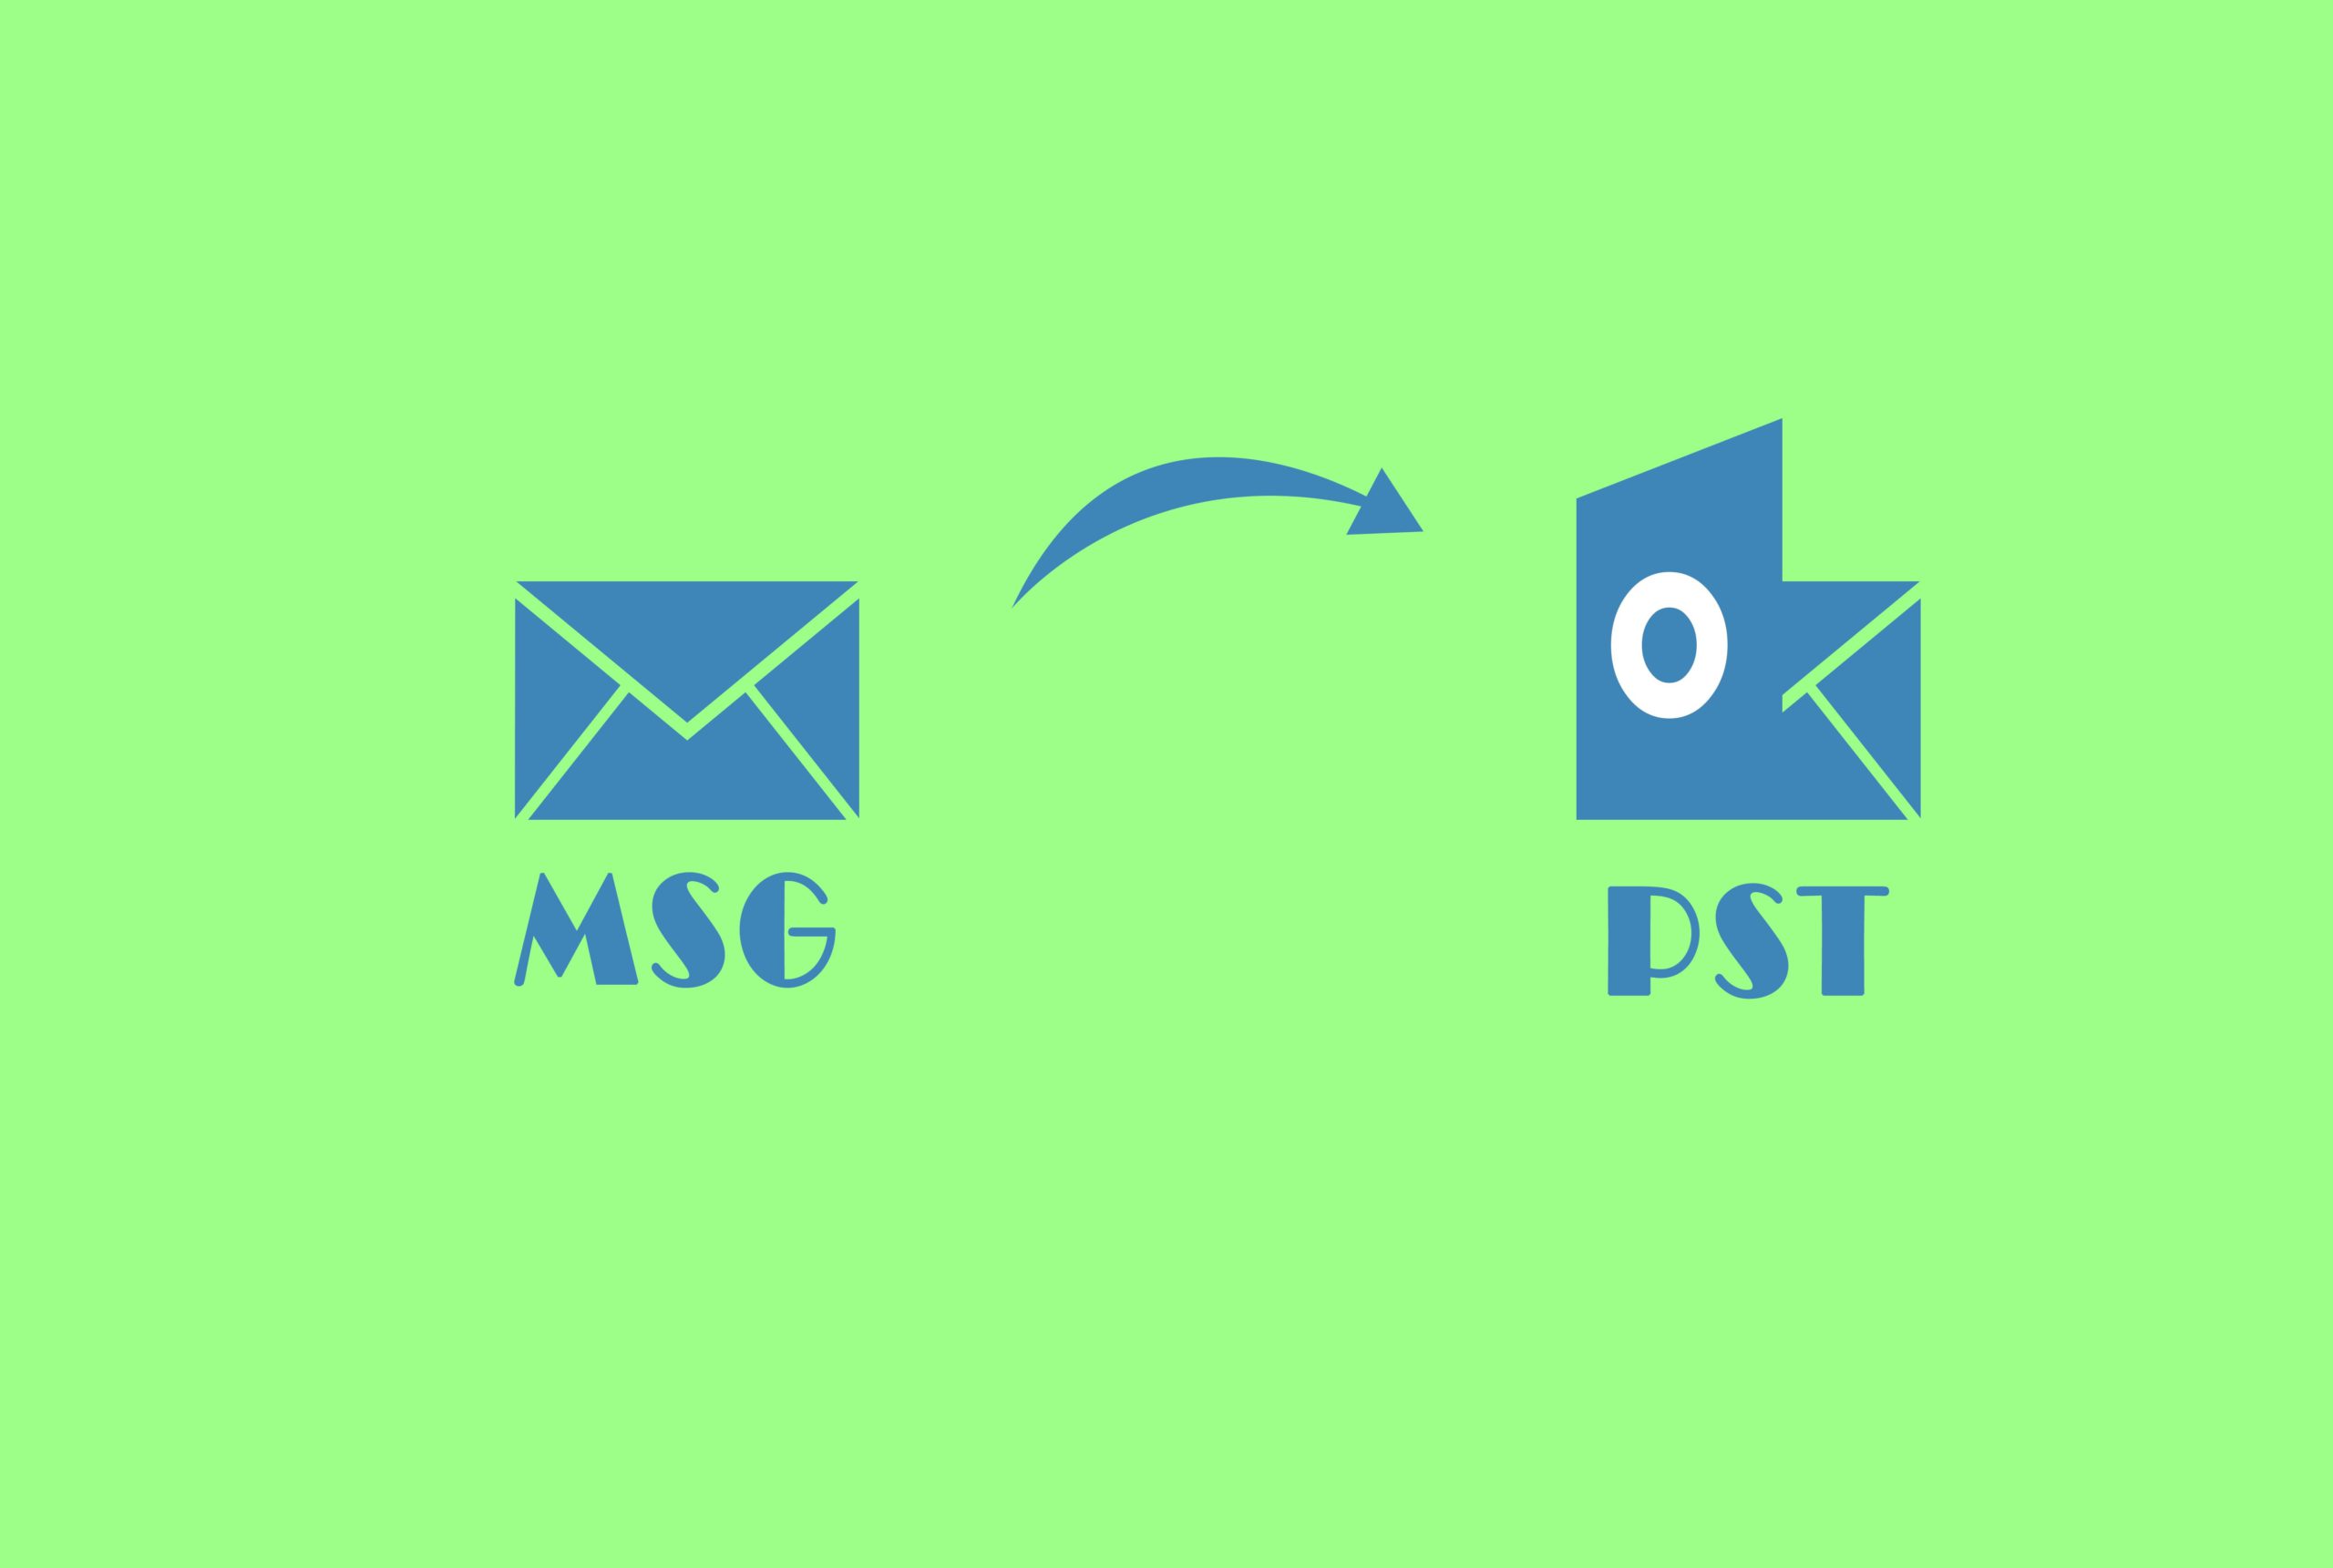 How do I Convert MSG to PST Automatically?